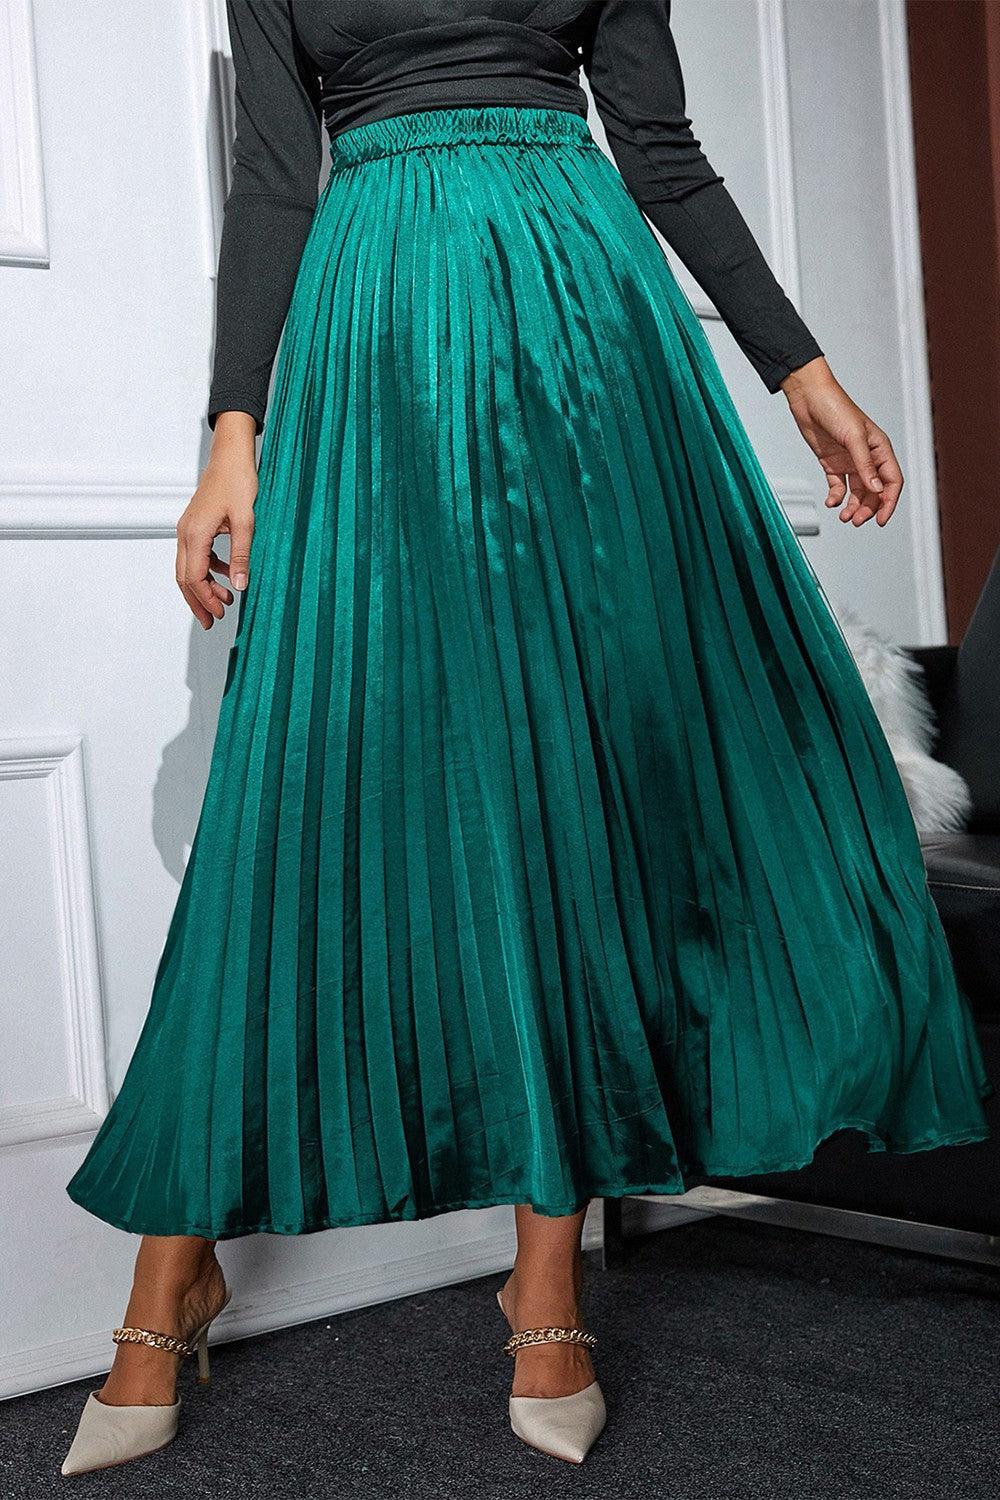 a woman wearing a green pleated skirt